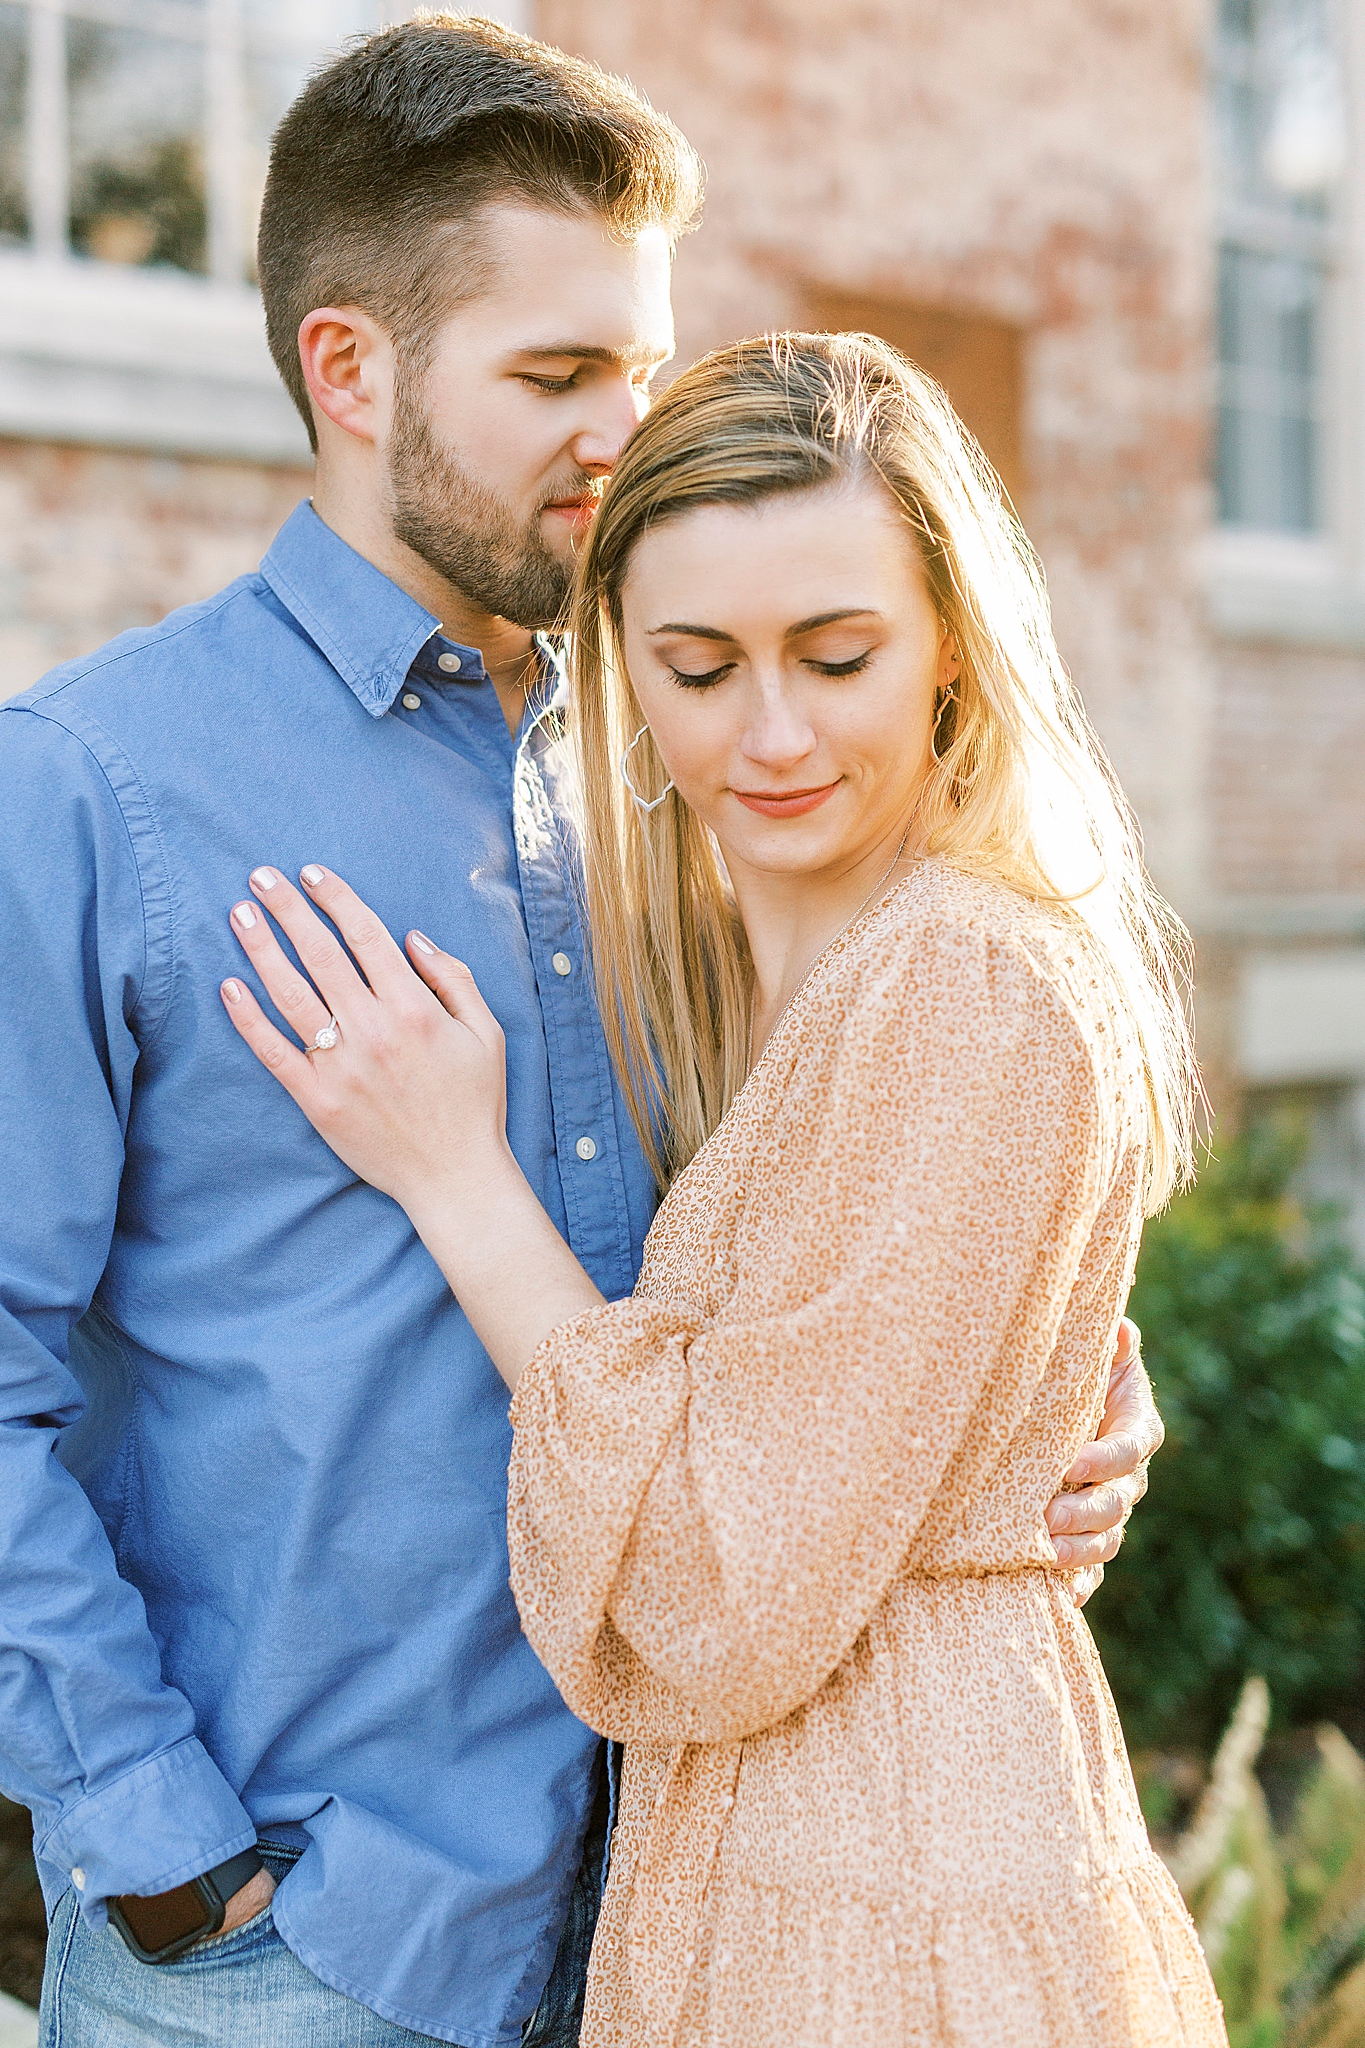 UNC Chapel Hill alumni pose together during engagement photos on campus